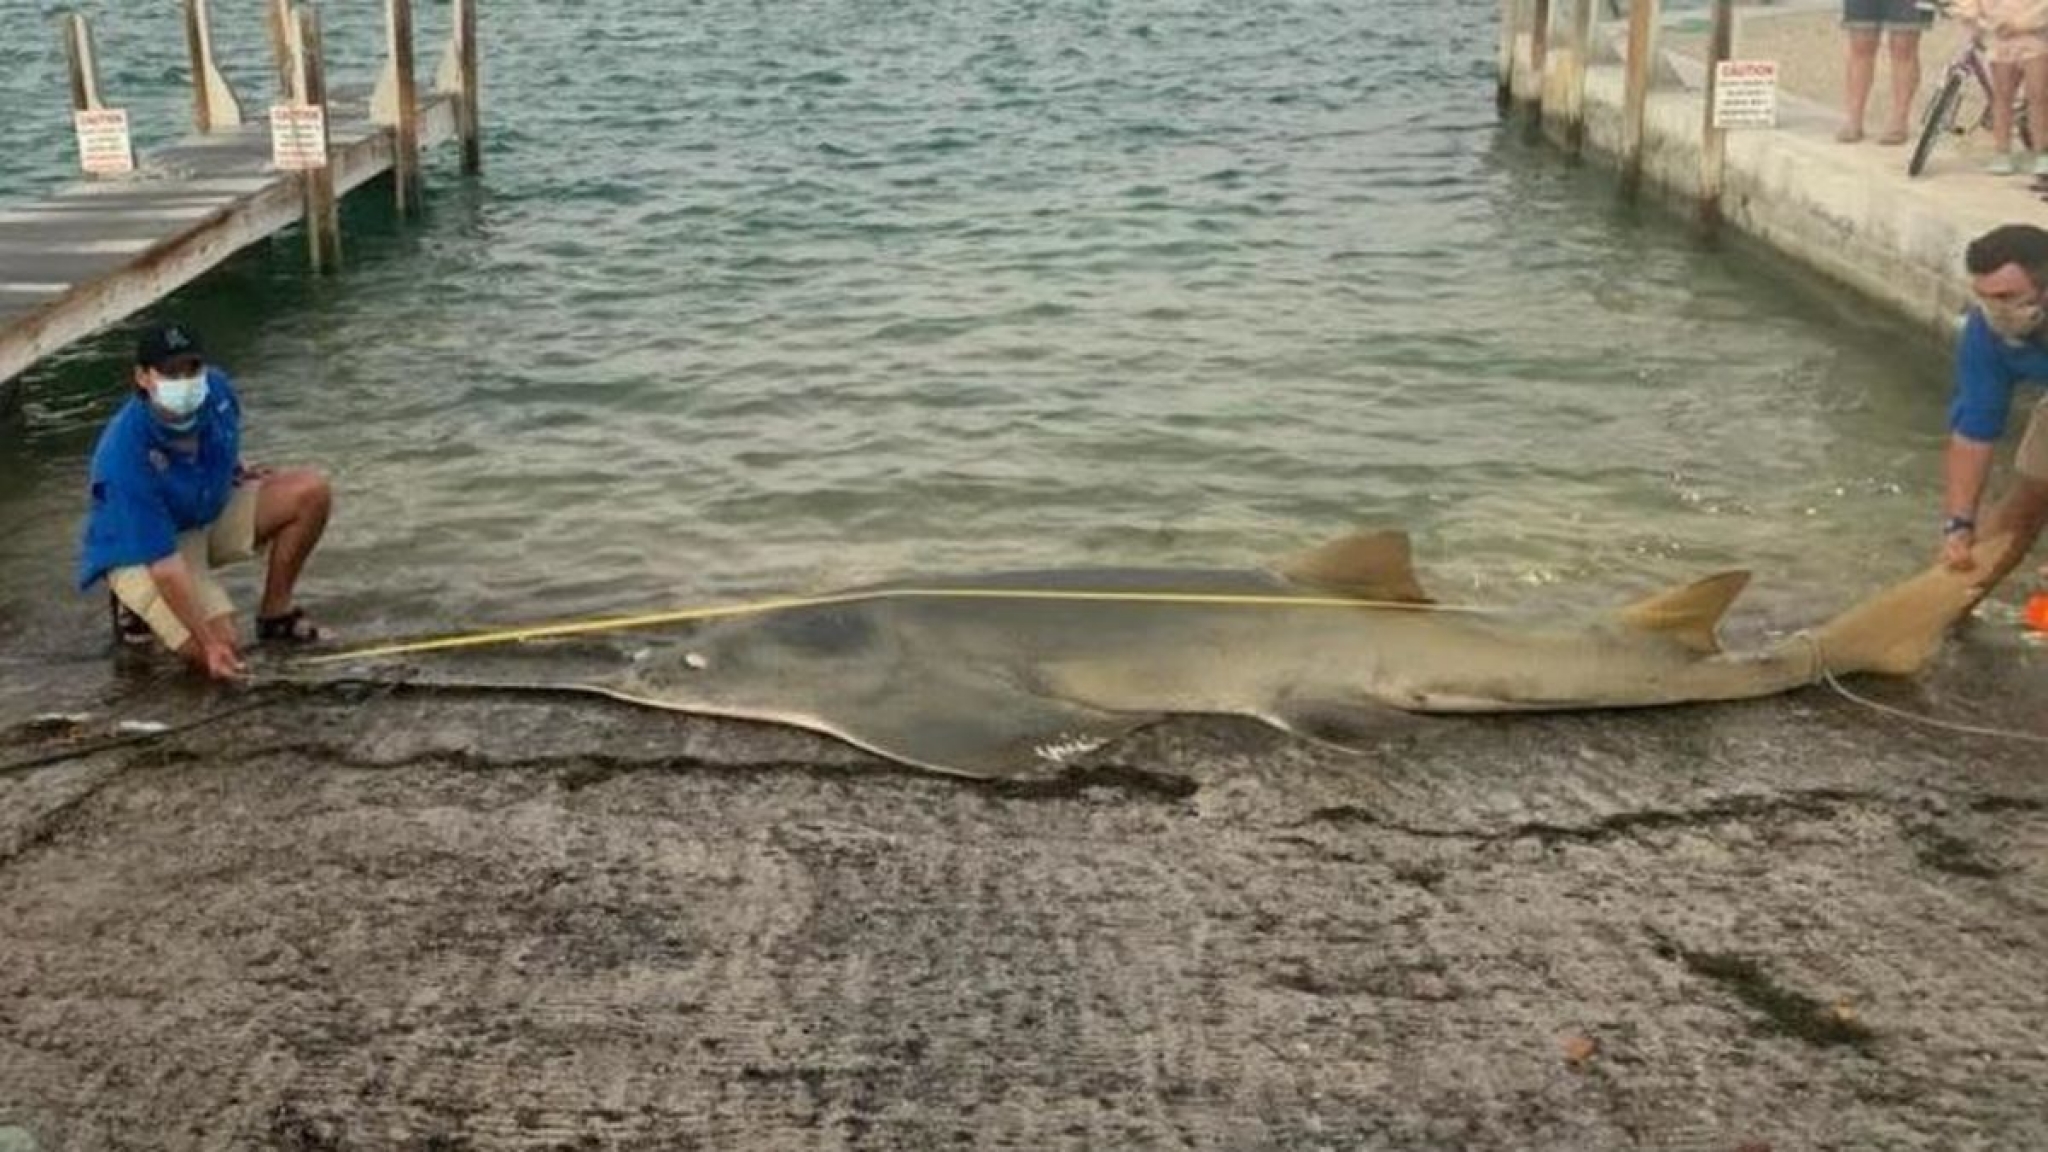 The Biggest Smalltooth Sawfish Ever Measured Washed Ashore in Florida